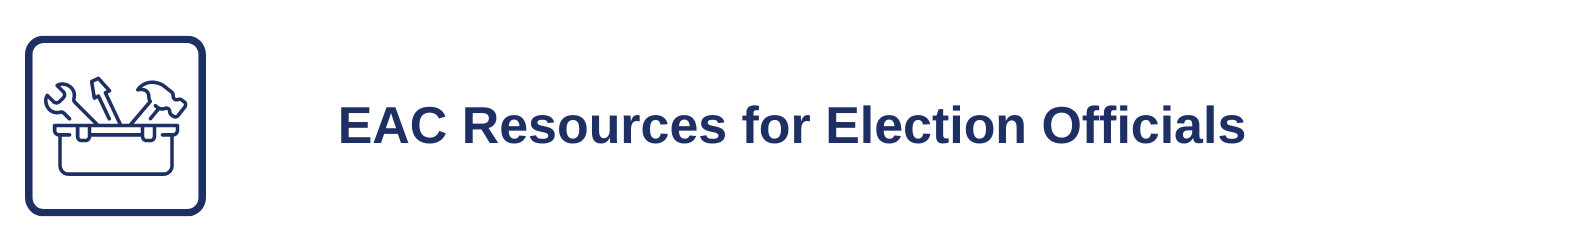 EAC Resources for Election Officials